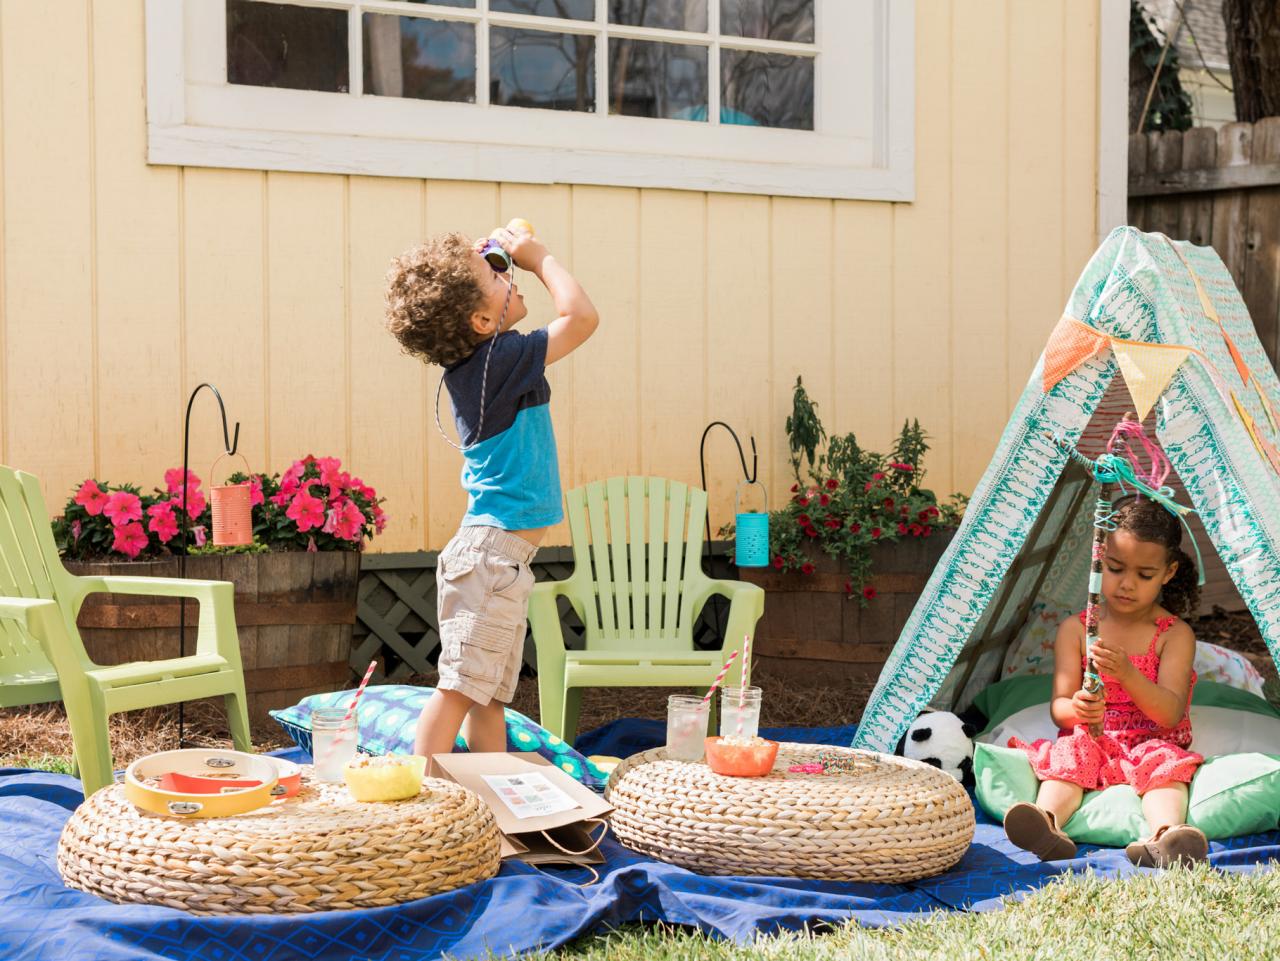 21 Creative Outdoor Games for Families and Friends · Pint-sized